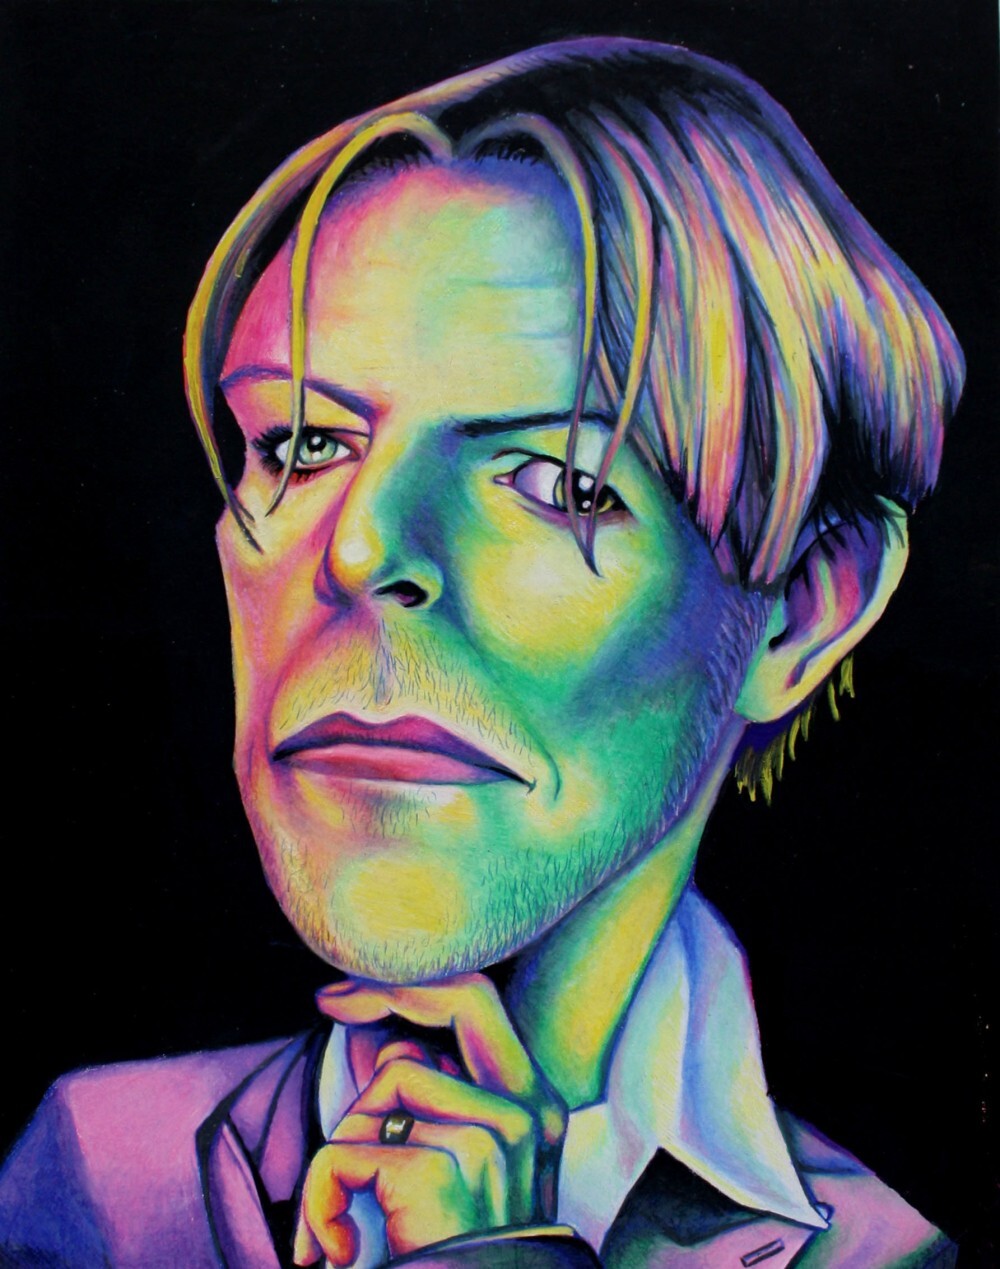 David Bowie, 2013, colored pencil and gouache.